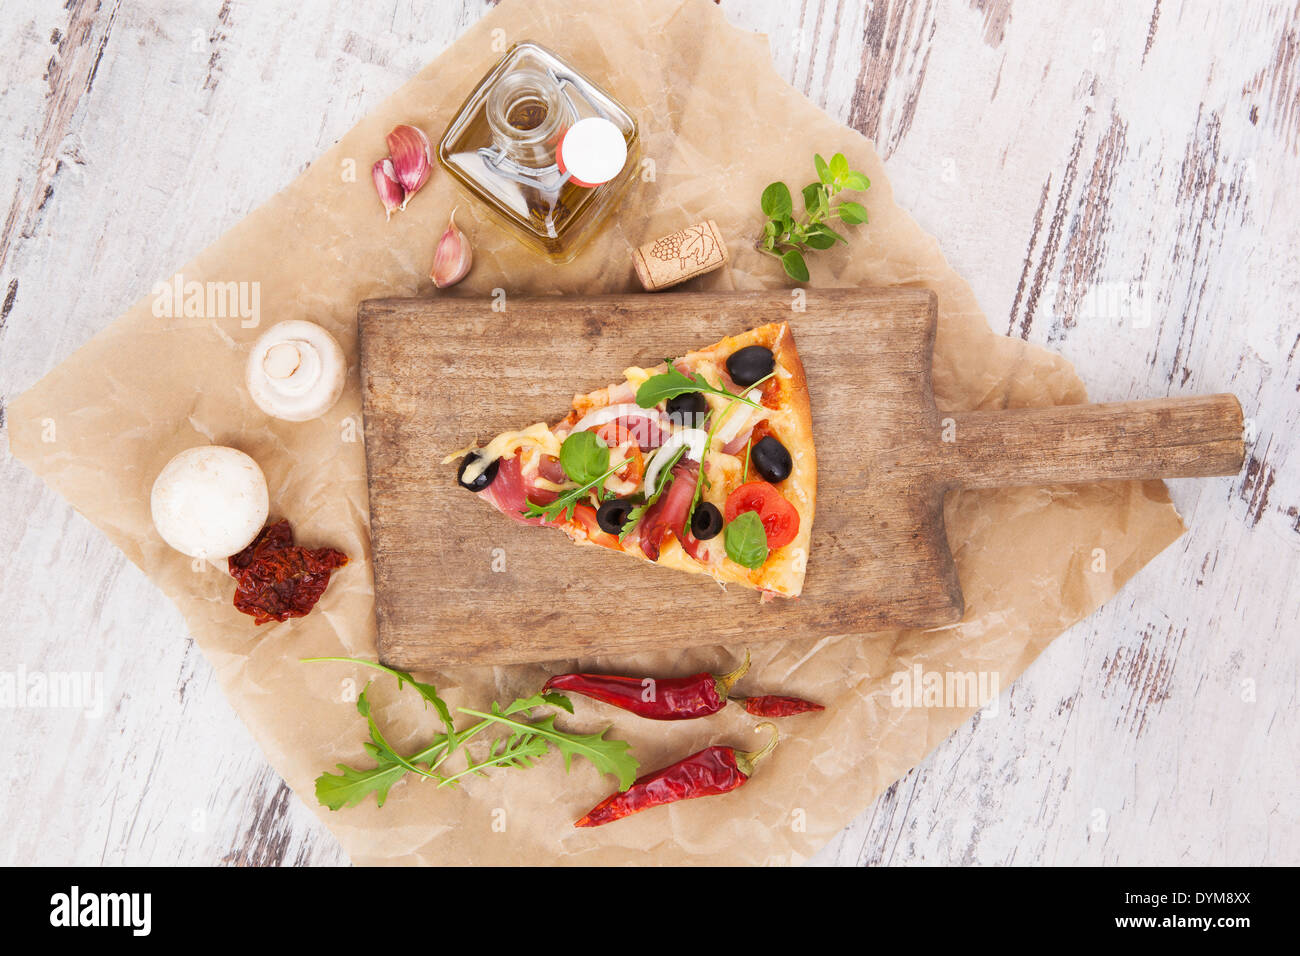 Culinary pizza cooking. Pizza piece on wooden kitchen board, with various ingredients and toppings. Fresh herbs, olive oil Stock Photo